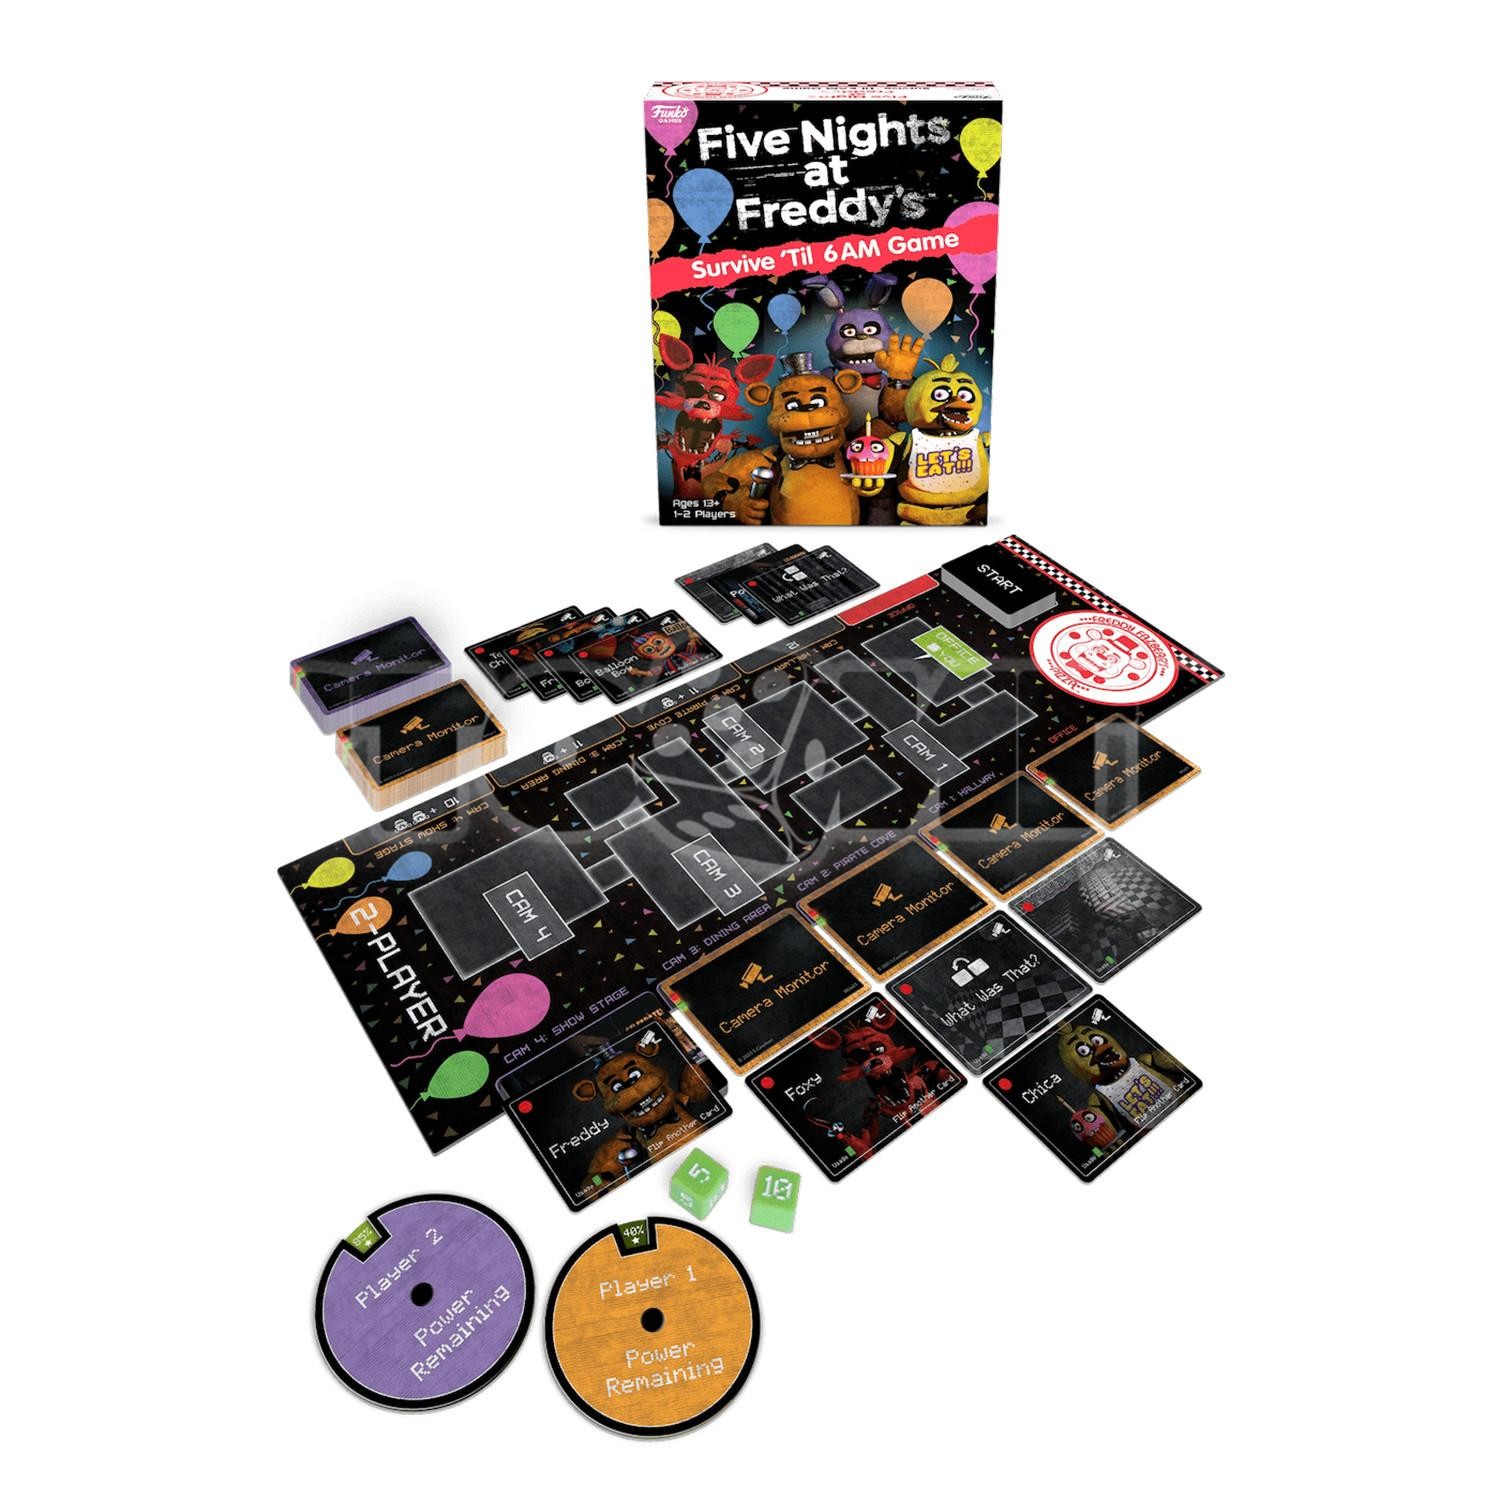 Funko Games Five Nights at Freddy's Survive 'Til 6AM Game